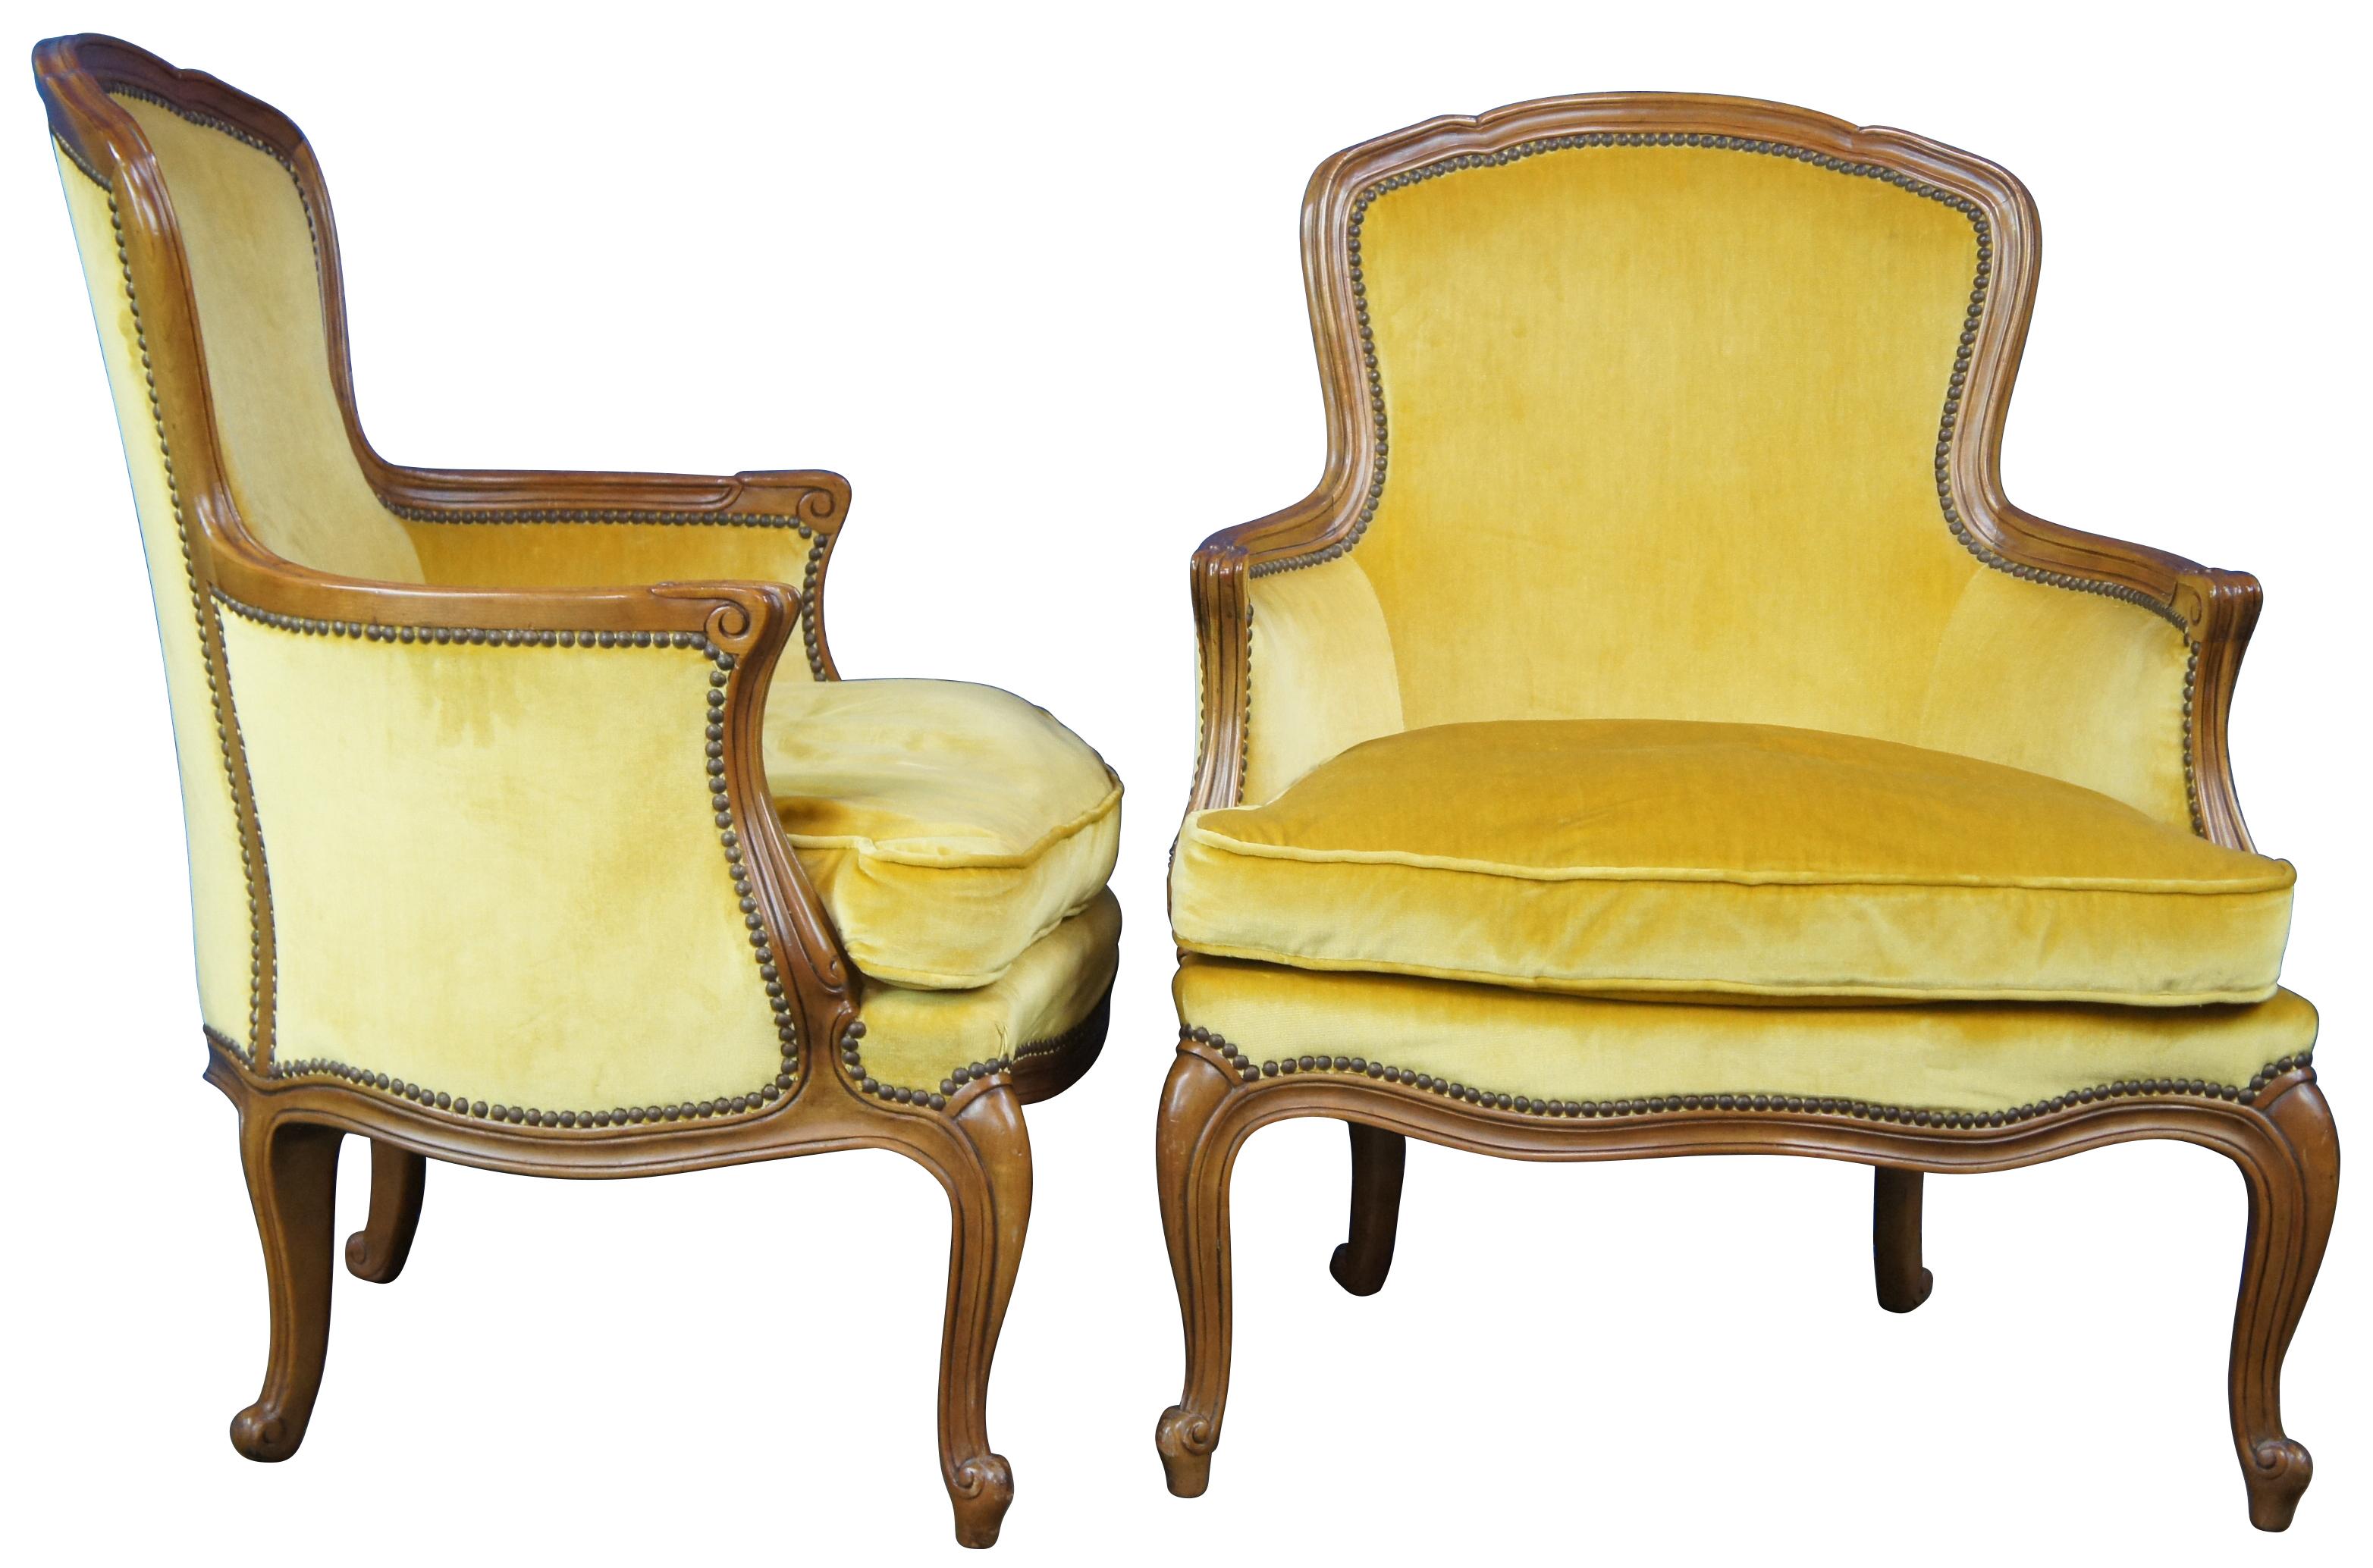 Pair of two vintage Baker Furniture Louis XV Bergere armchairs, circa mide 20th century. Made of walnut featuring serpentine form with velvet upholstery, nailhead trim and cabriole legs.

Provenance : Jerome Schottenstein Estate, Columbus Ohio.